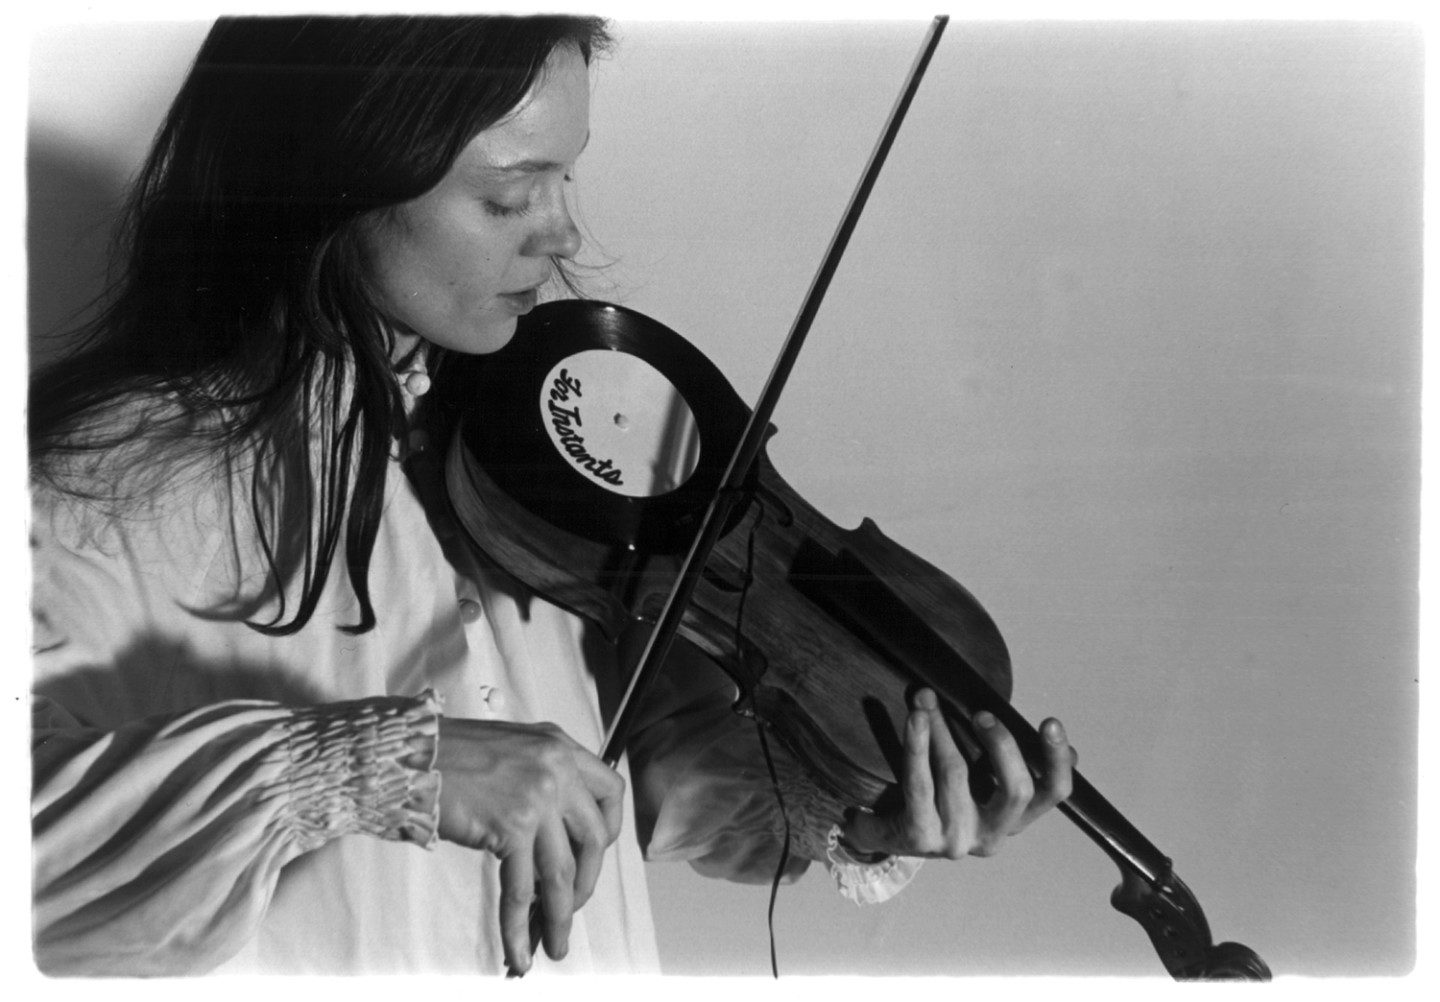 Laurie Anderson plays the viophonograph, an instrument she invented herself